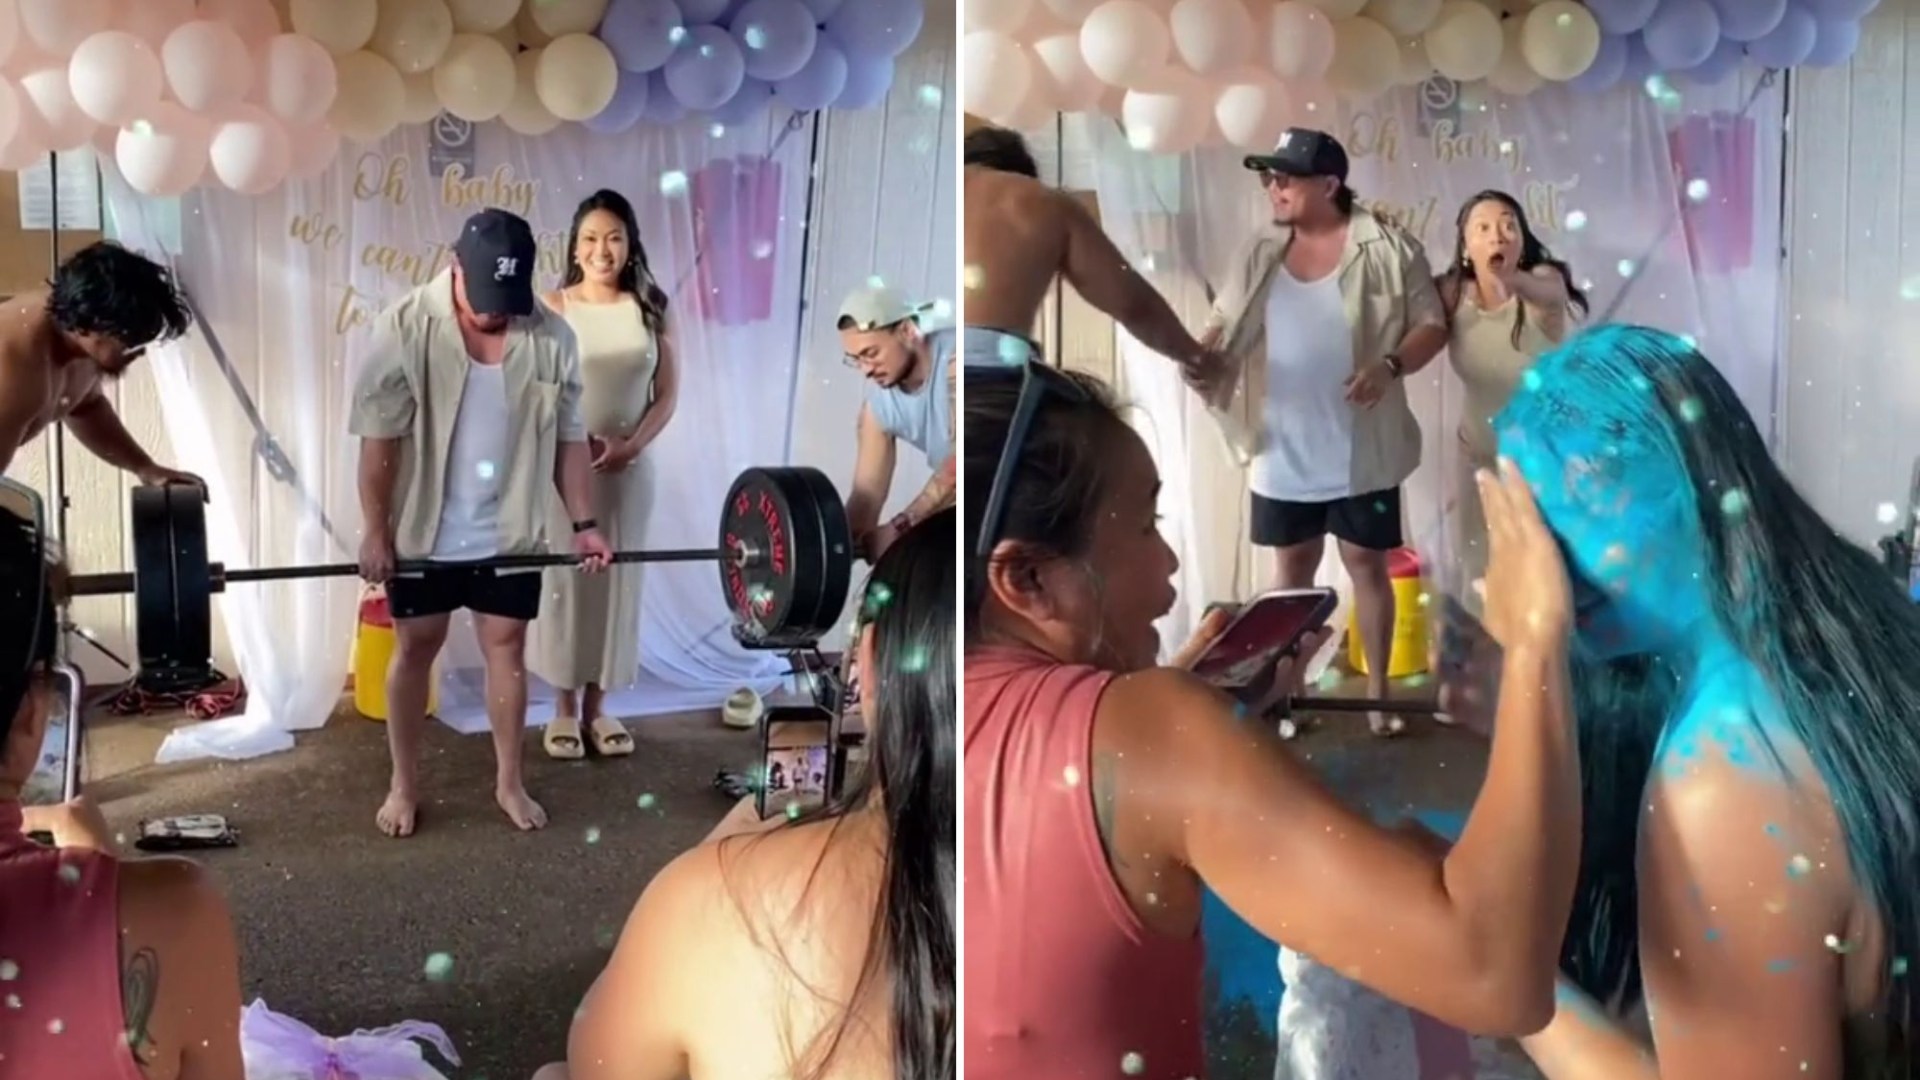 ‘Congratulations on the baby and the smurf’ viewers say as they watch the moment gender reveal goes hilariously wrong [Video]